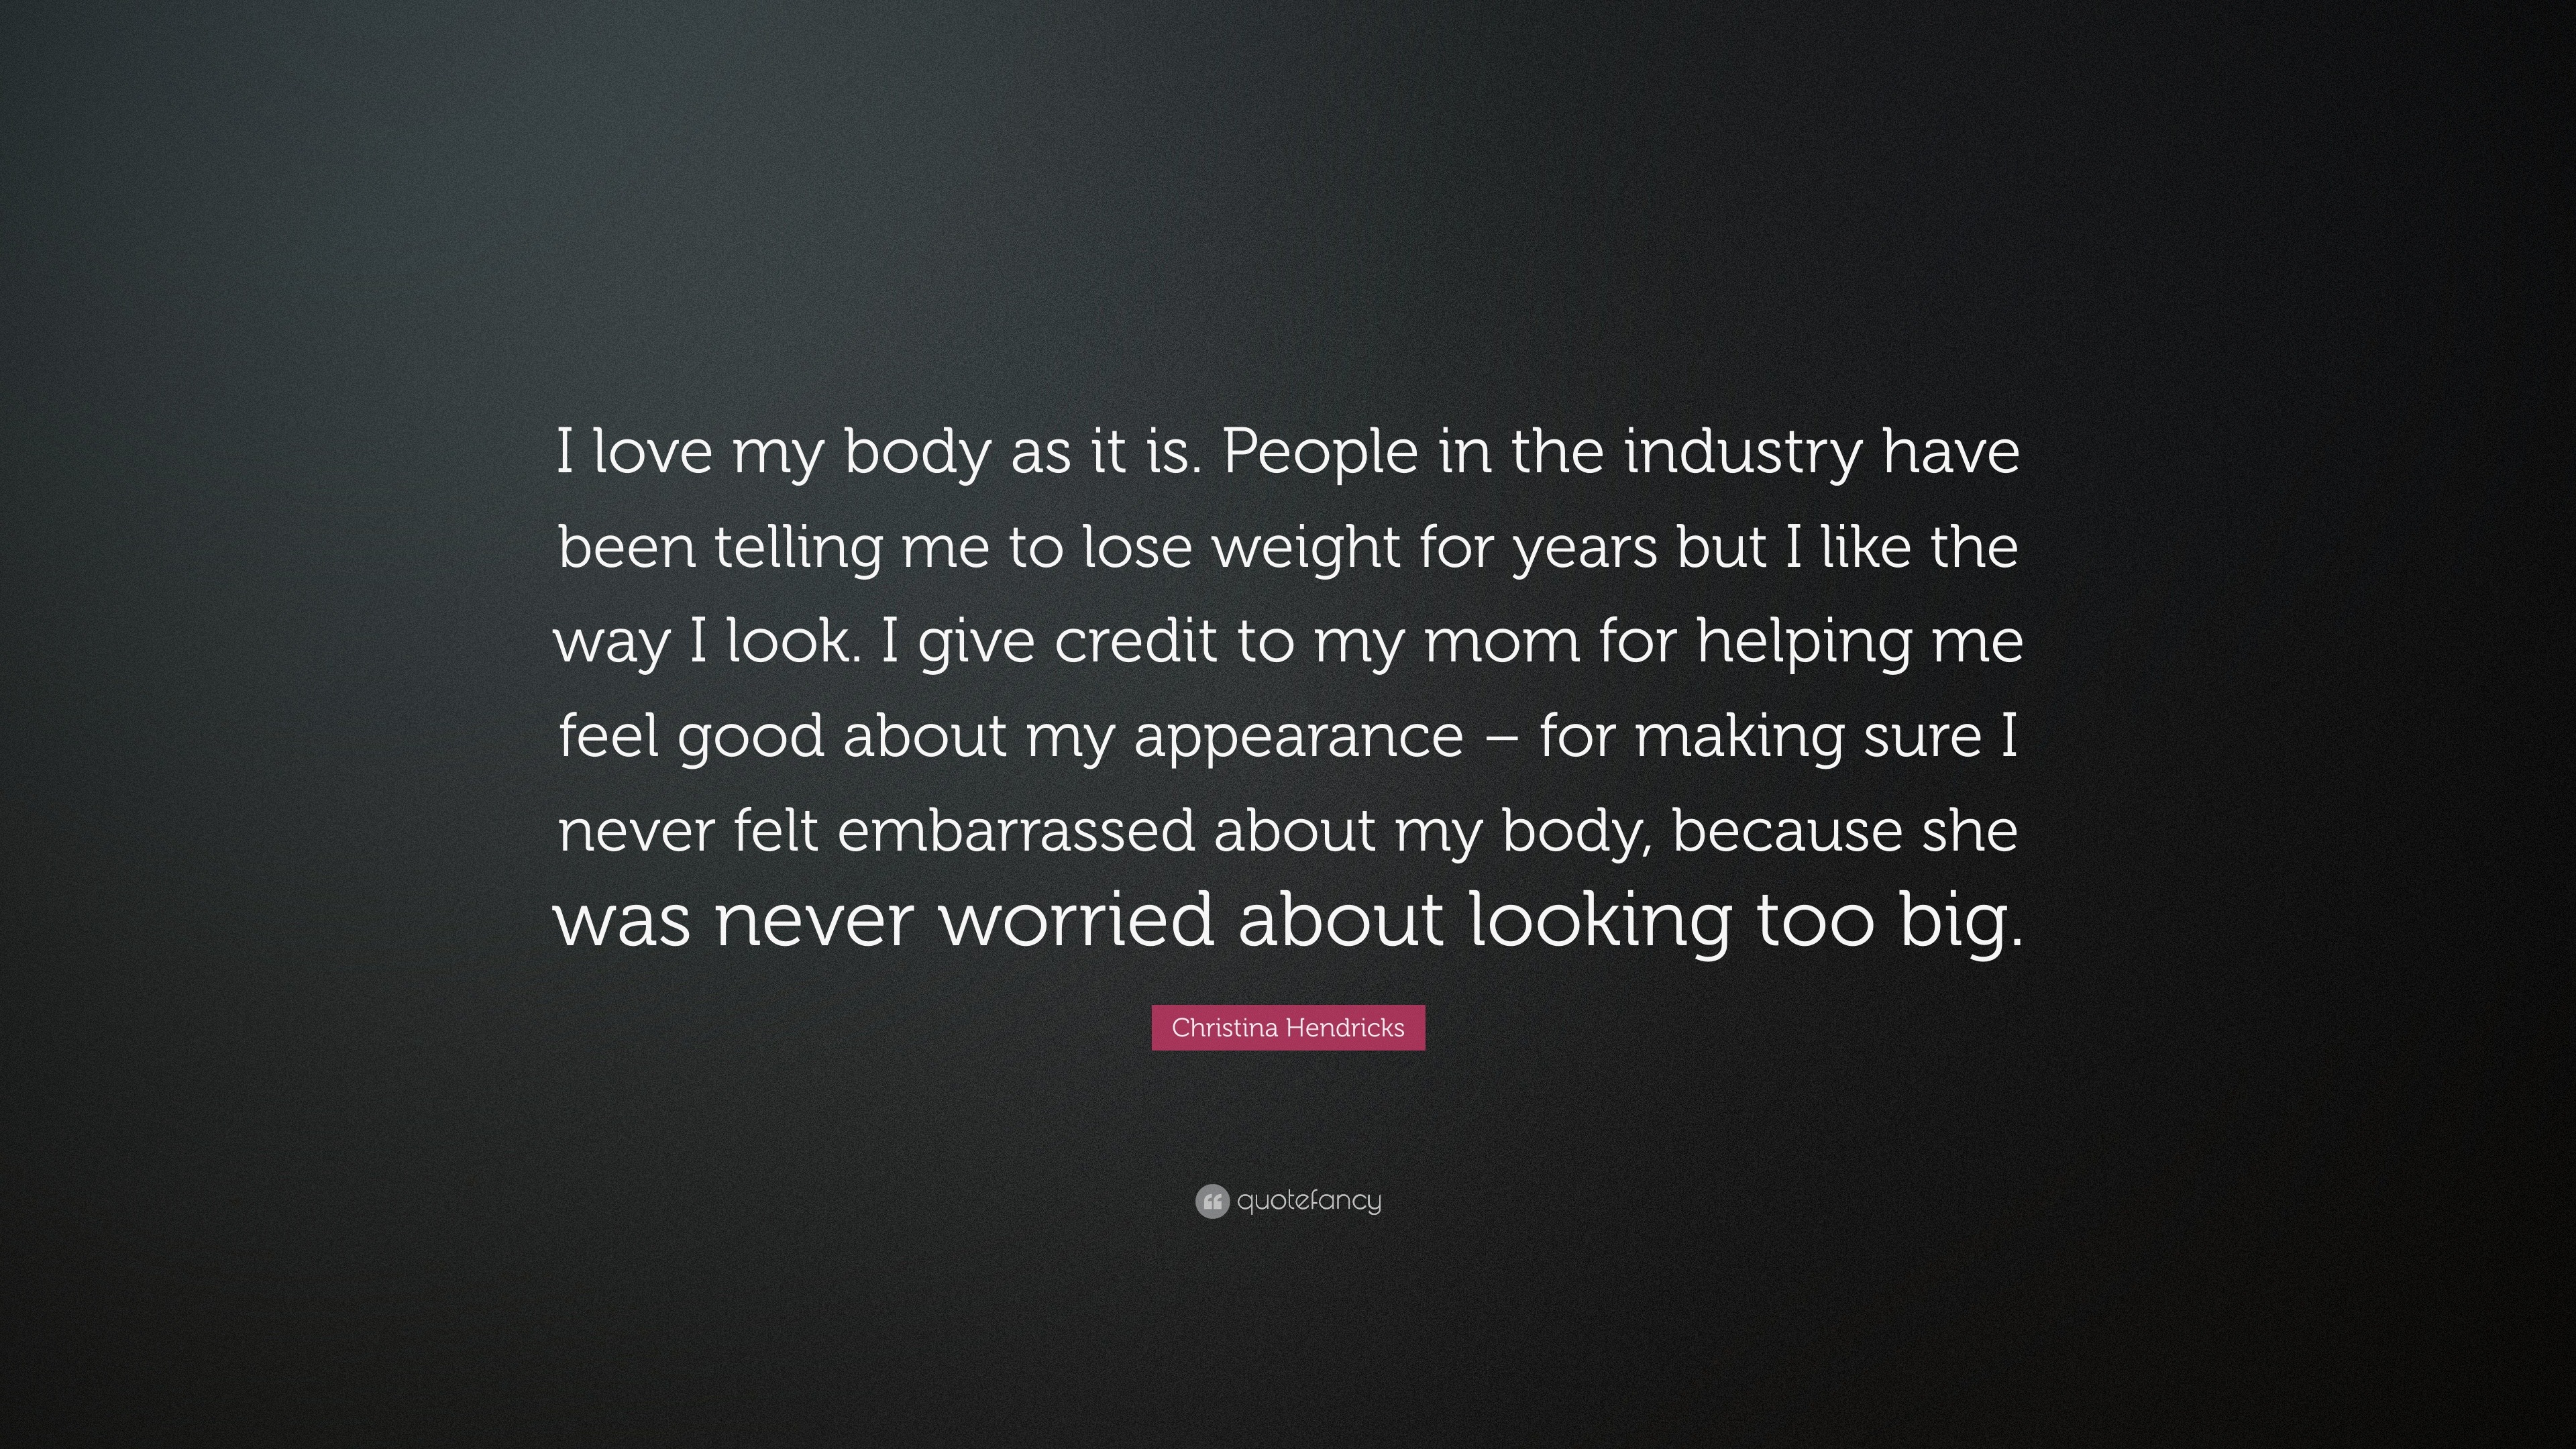 Christina Hendricks Quote: “I love my body as it is. People in the